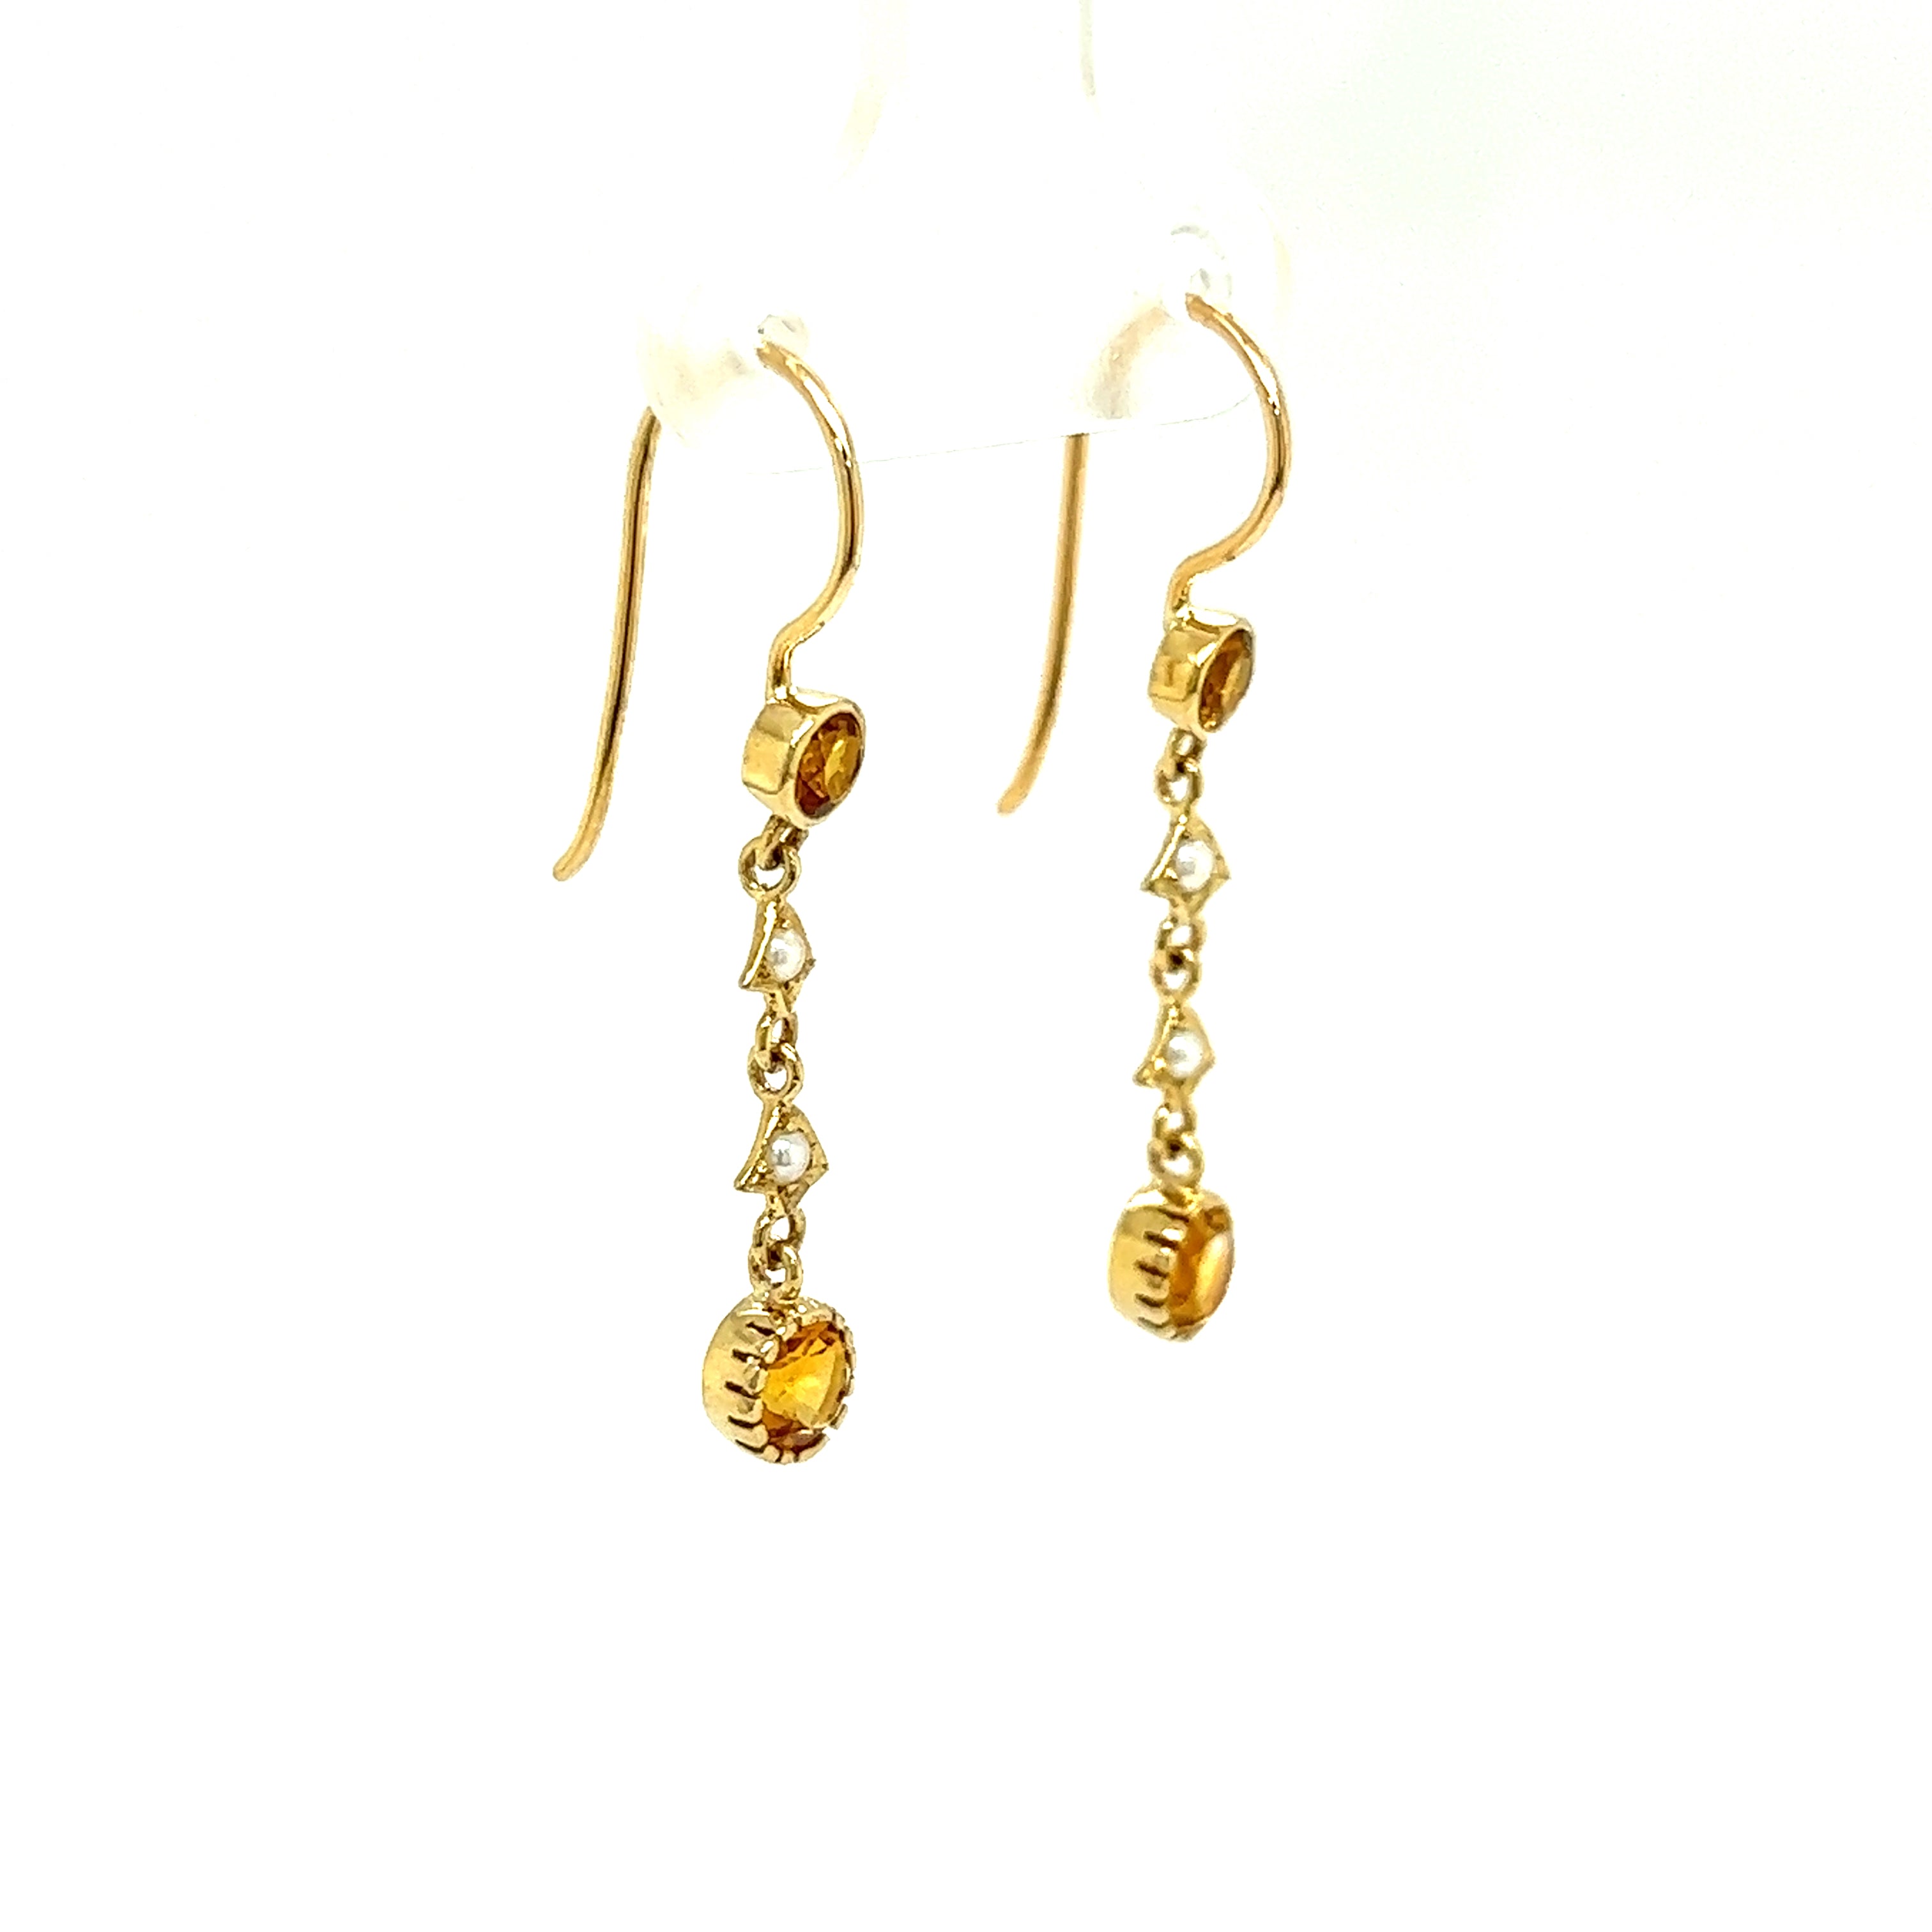 9ct yellow gold citrine and seed pearl earrings